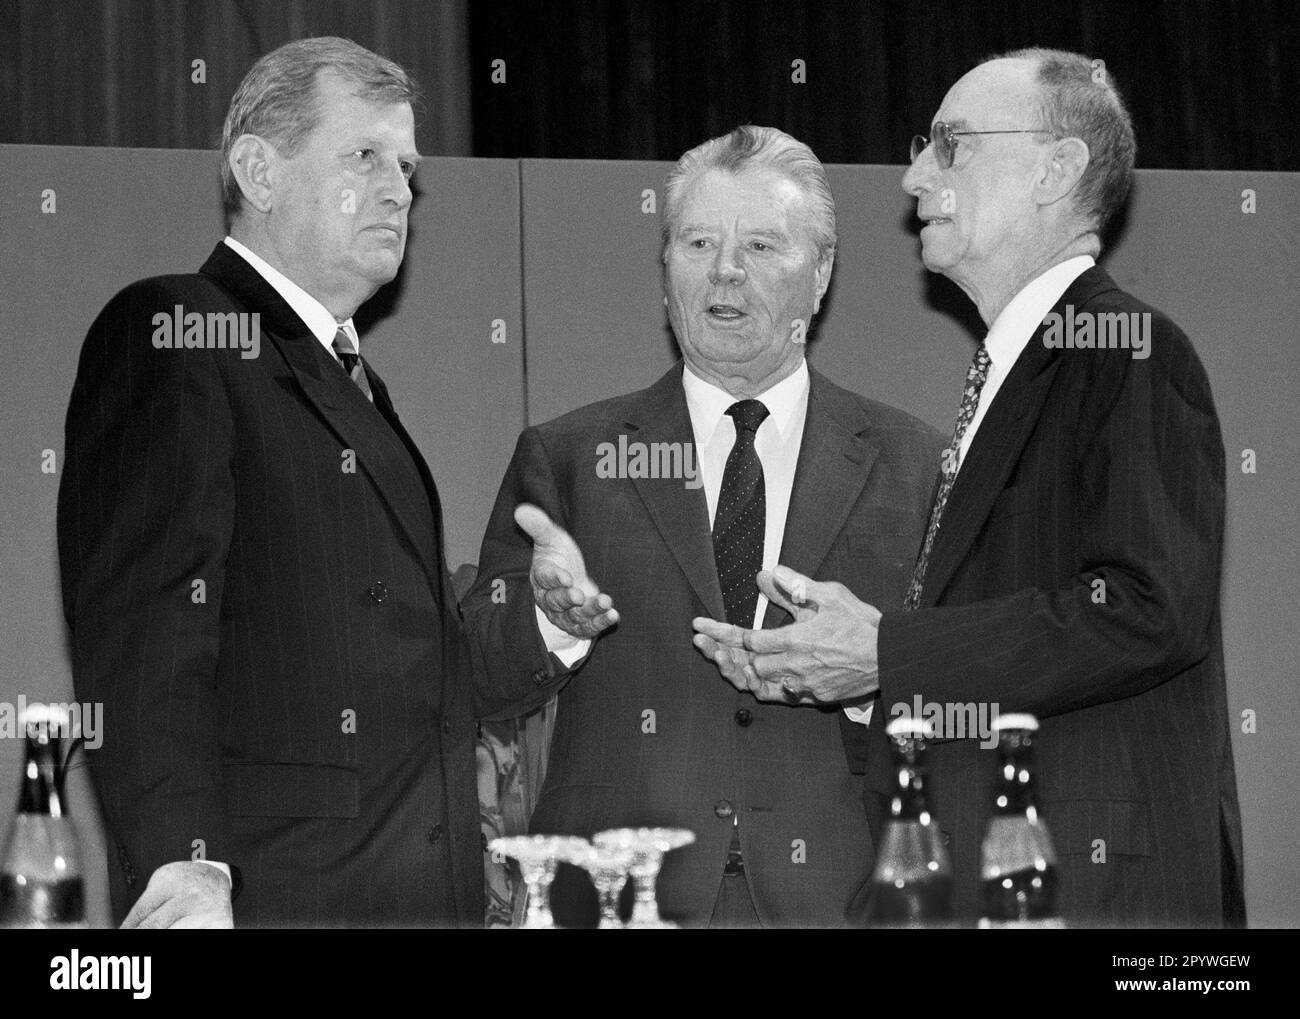 Friedel NEUBER , Chairman of the Board of WestLB , Walter SEIPP , Chairman of the Board of Commerzbank AG , and Edzard REUTER , Chairman of the Board of Daimler-Benz AG , July 1990 [automated translation] Stock Photo